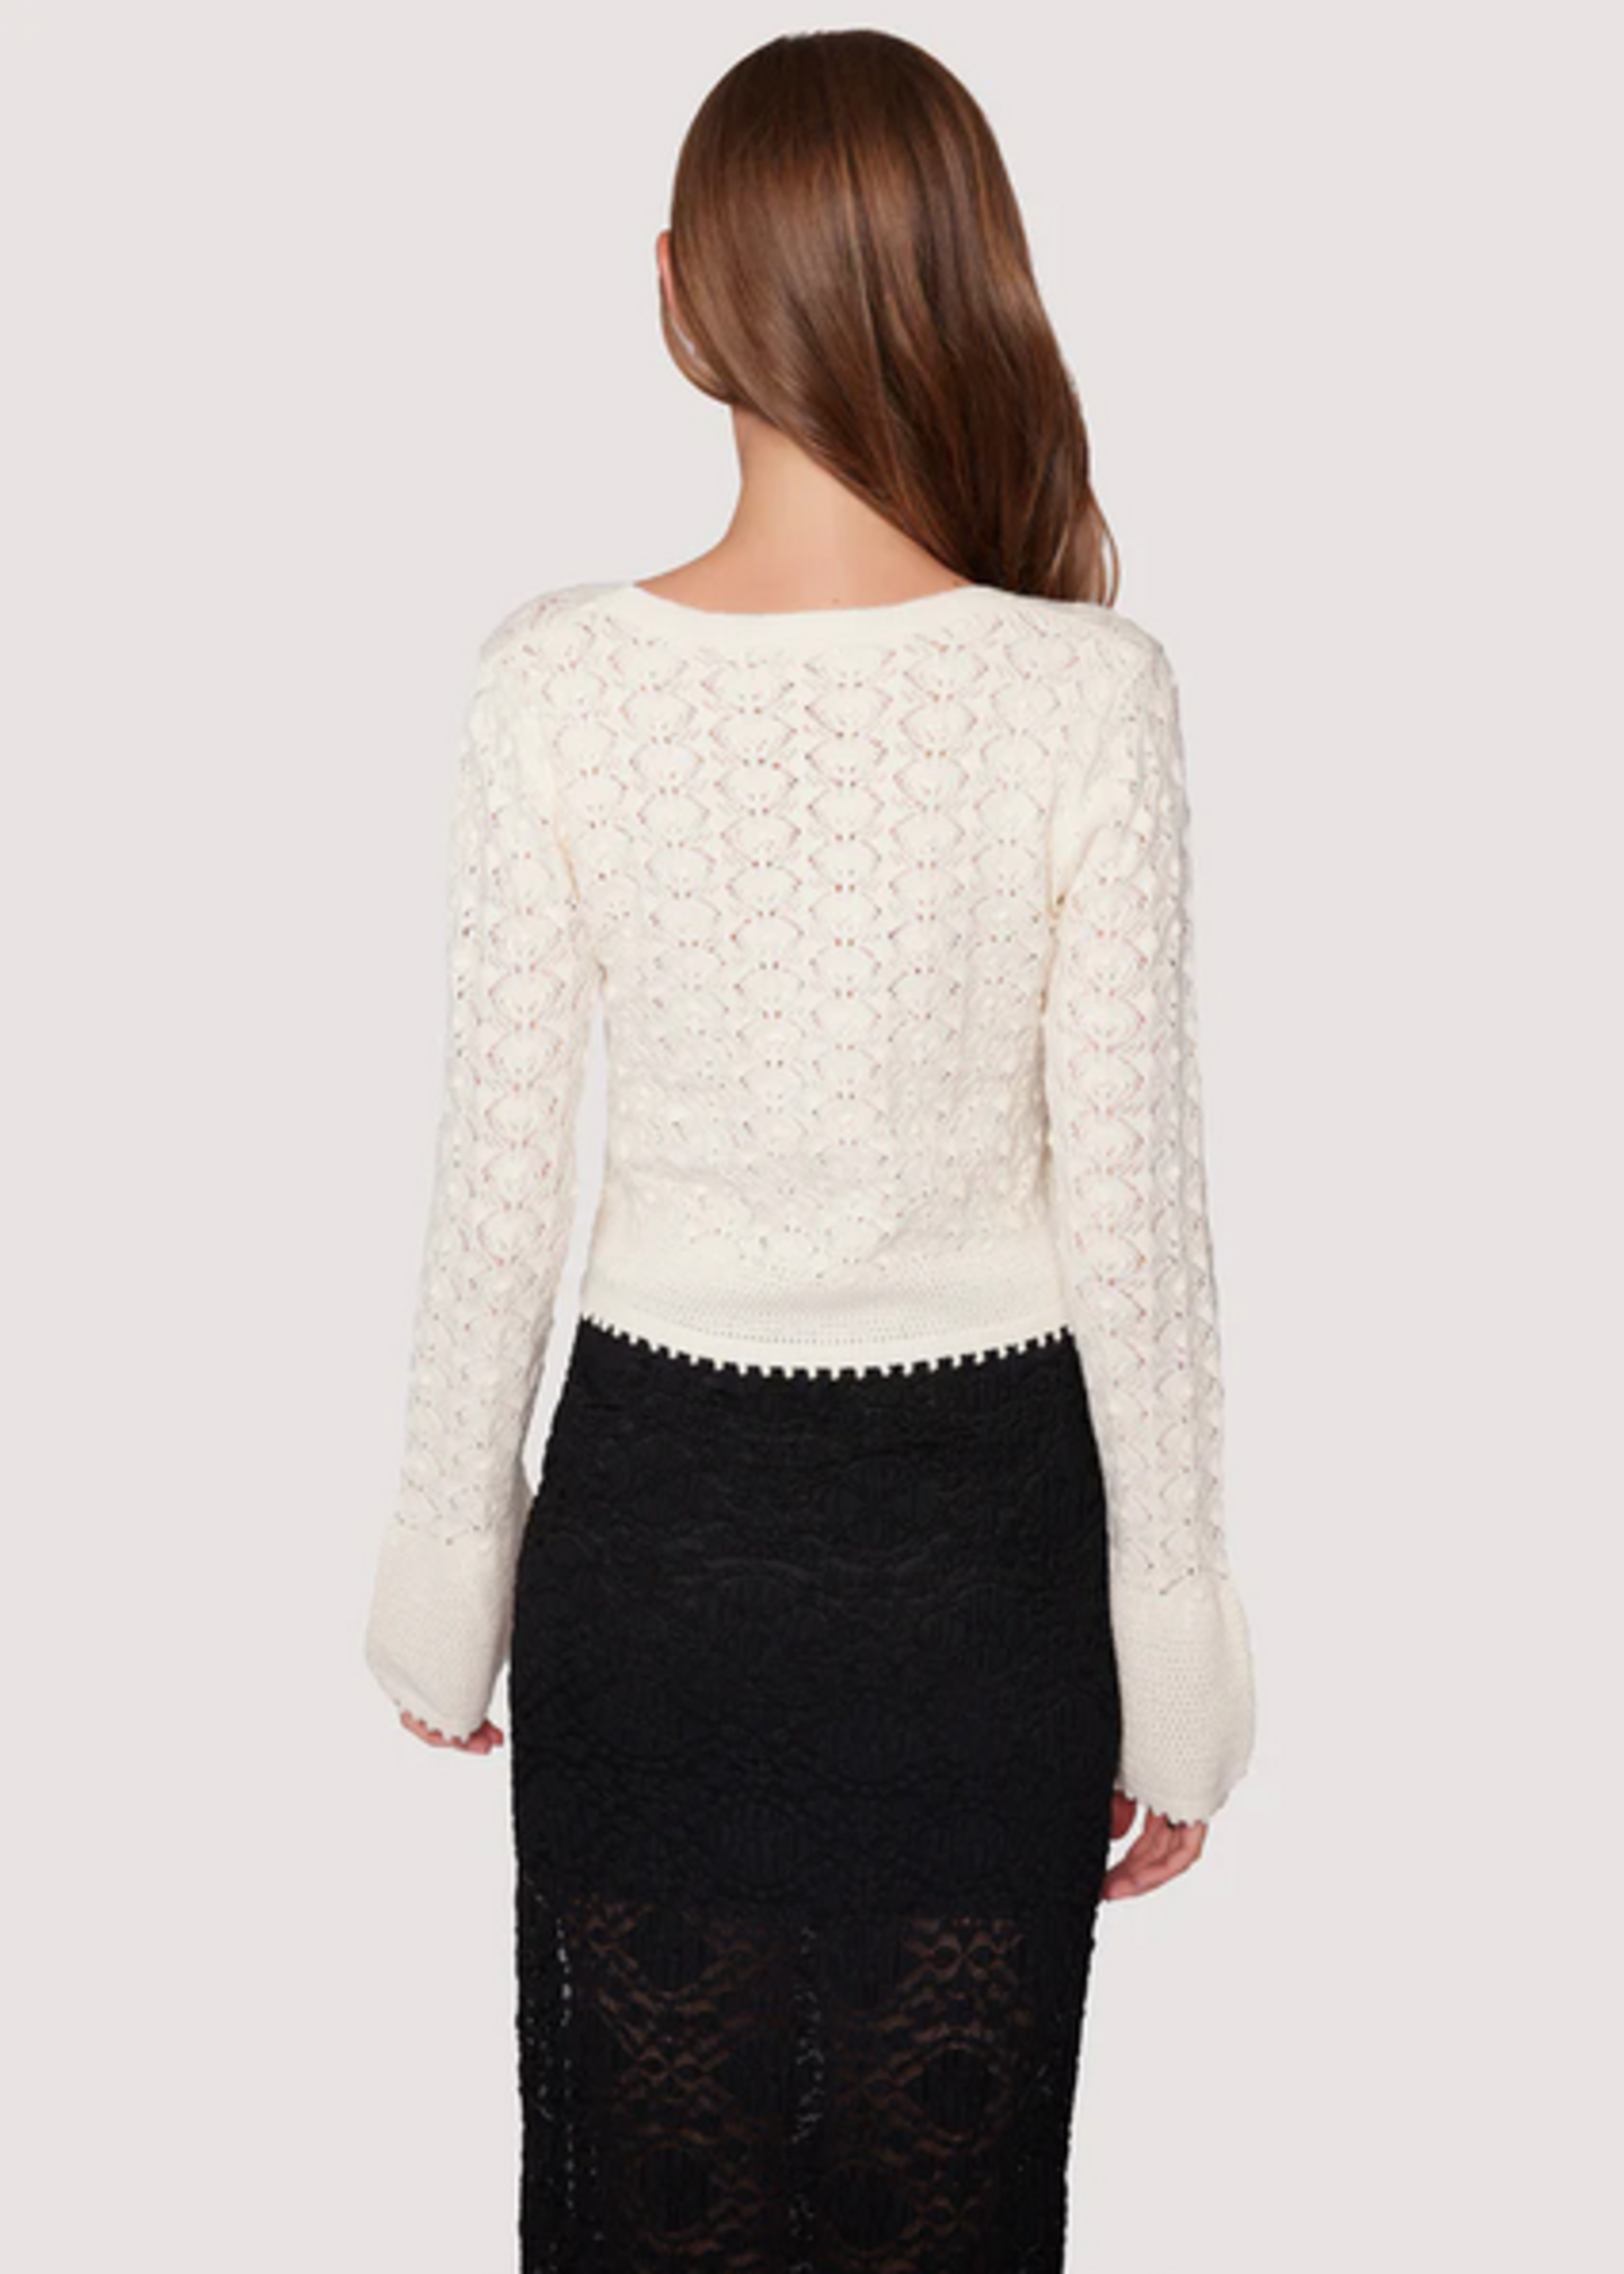 LOST & WANDER SERENA POINTELLE KNIT SQUARE NECK TOP